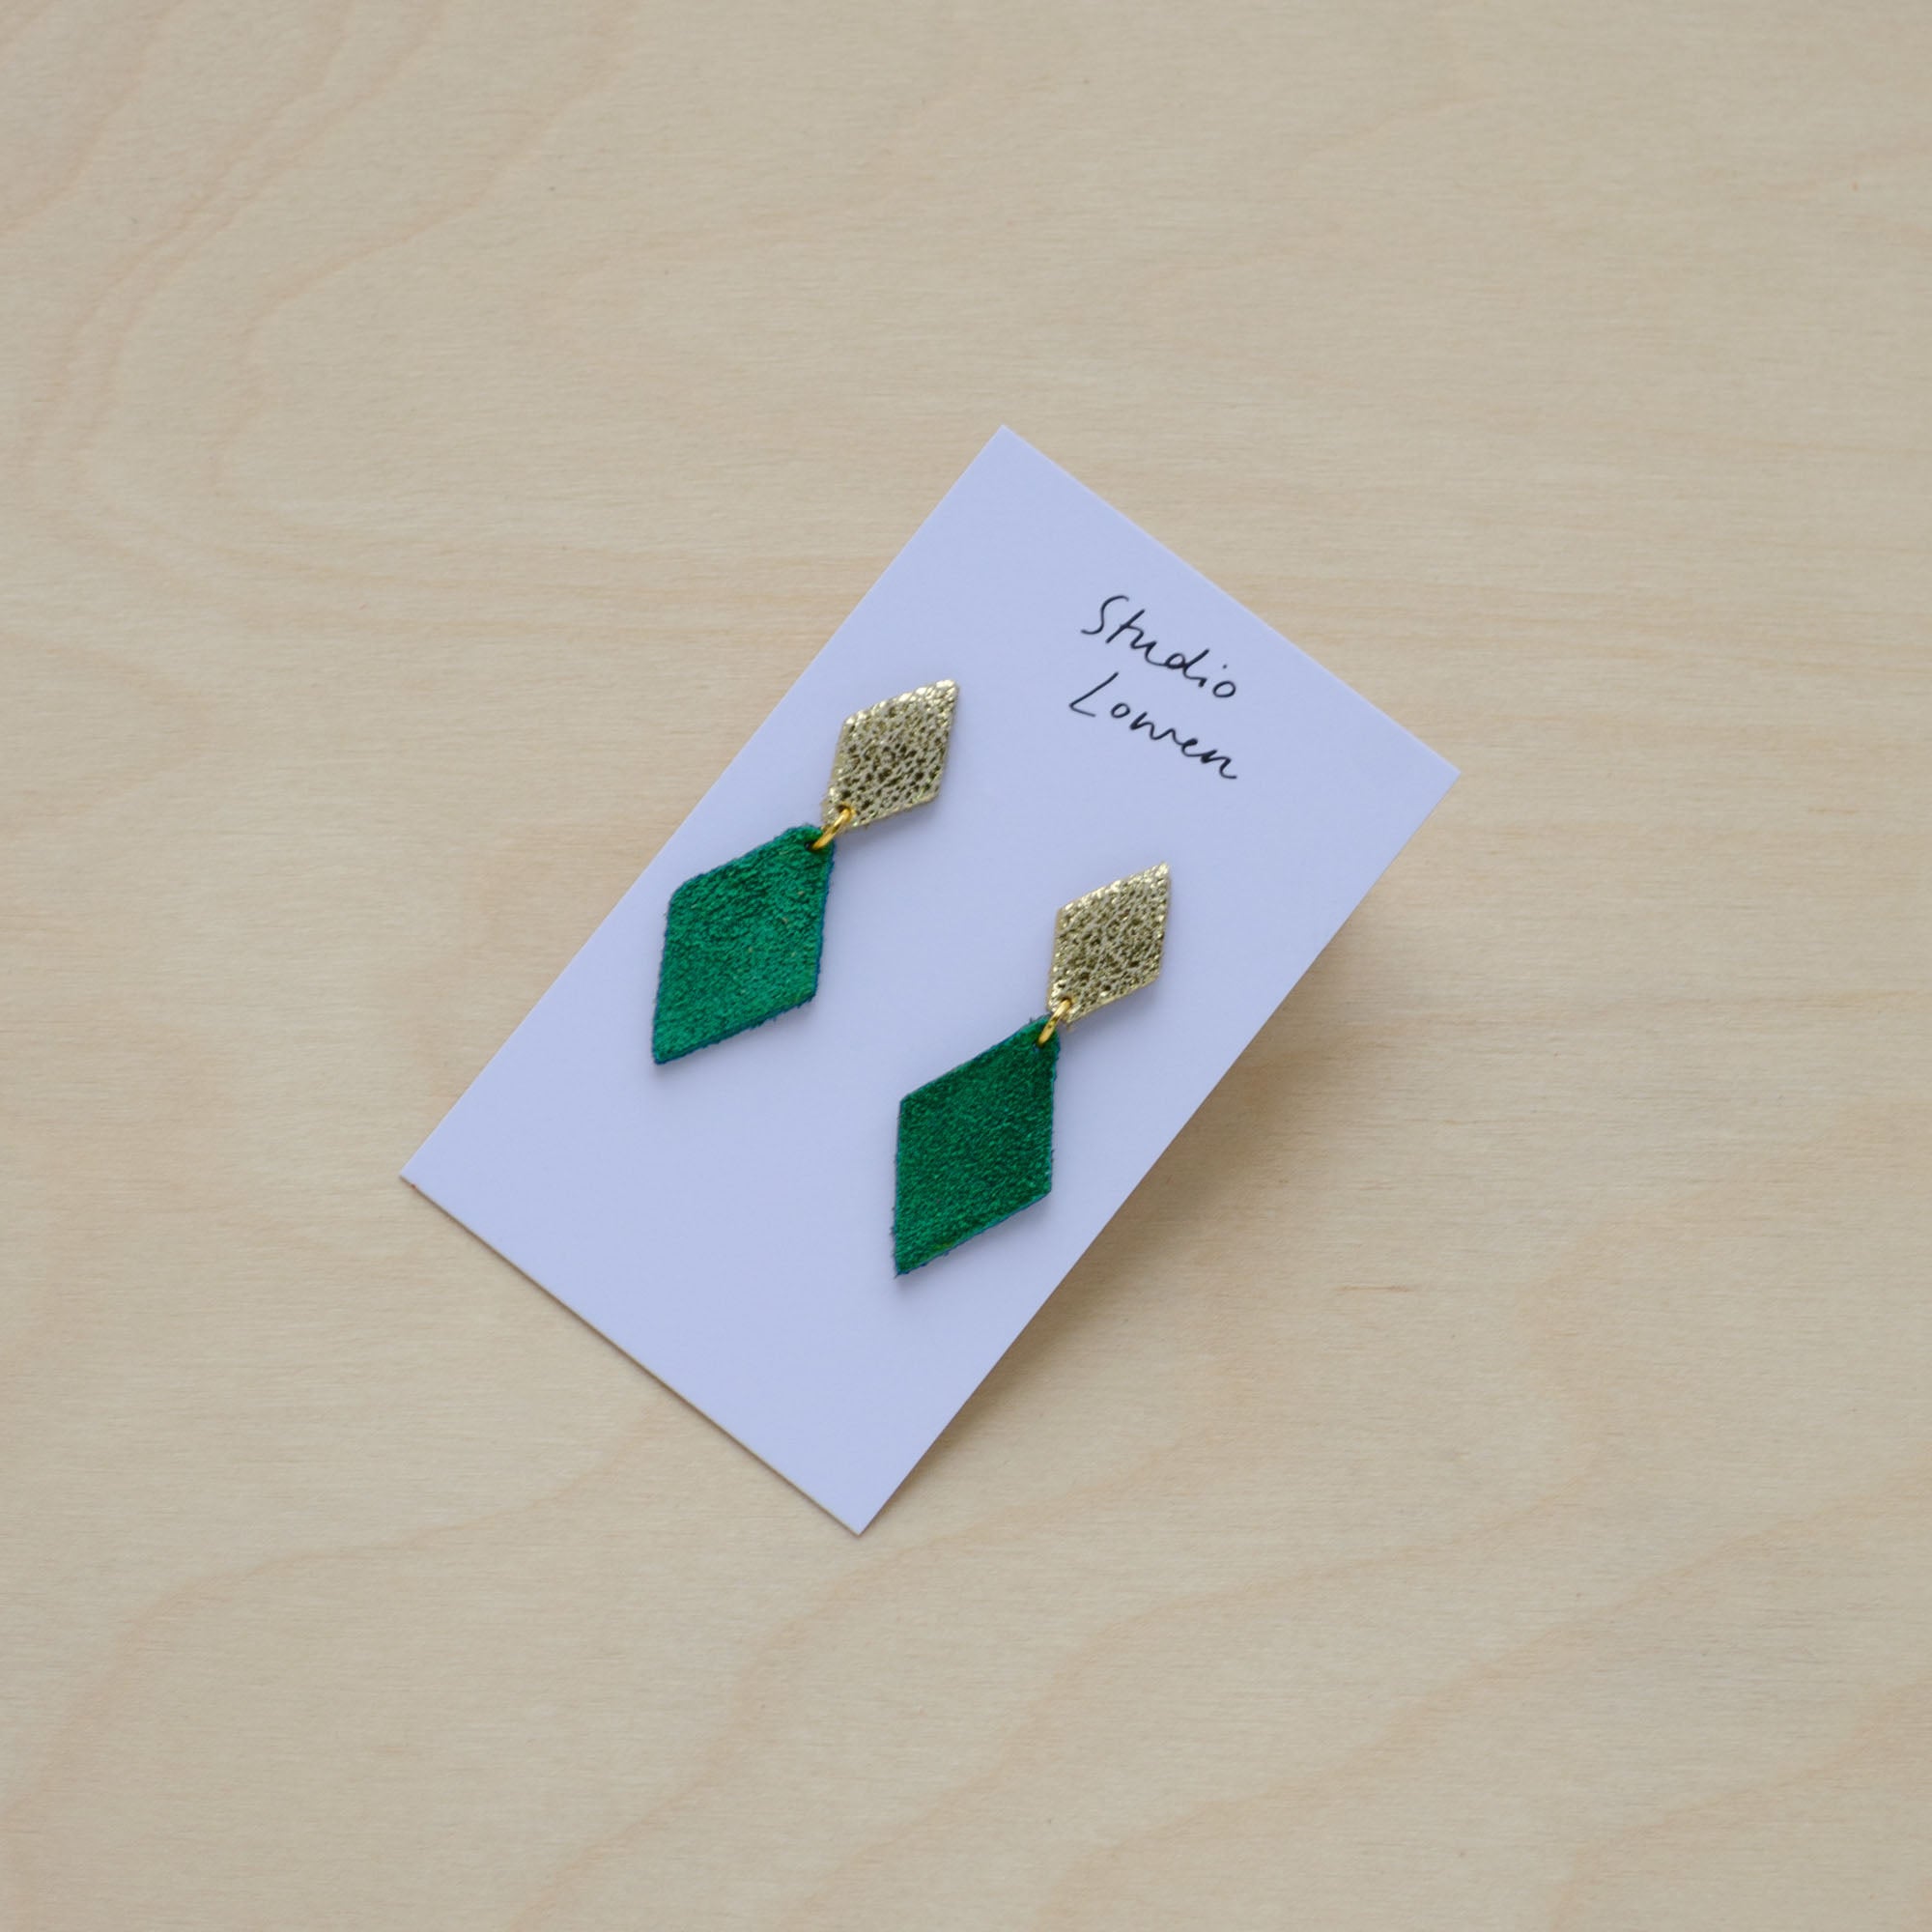 Alba Earrings in Jade Green and Shimmer Gold